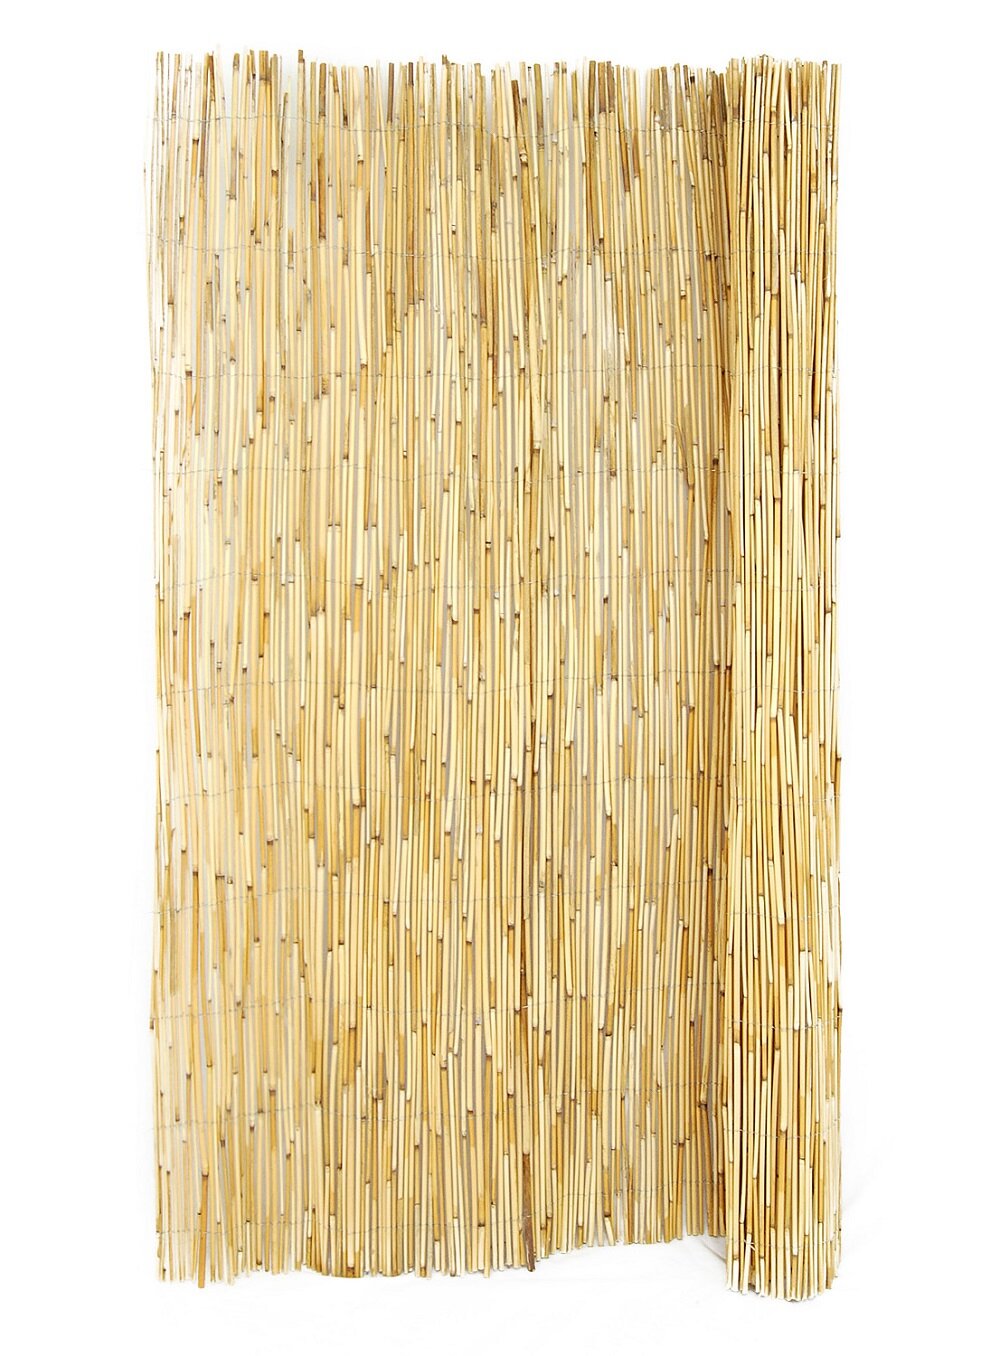 W Natural Peeled and Polished Reed Fencing Hampton Bay 4 ft H x 8 ft